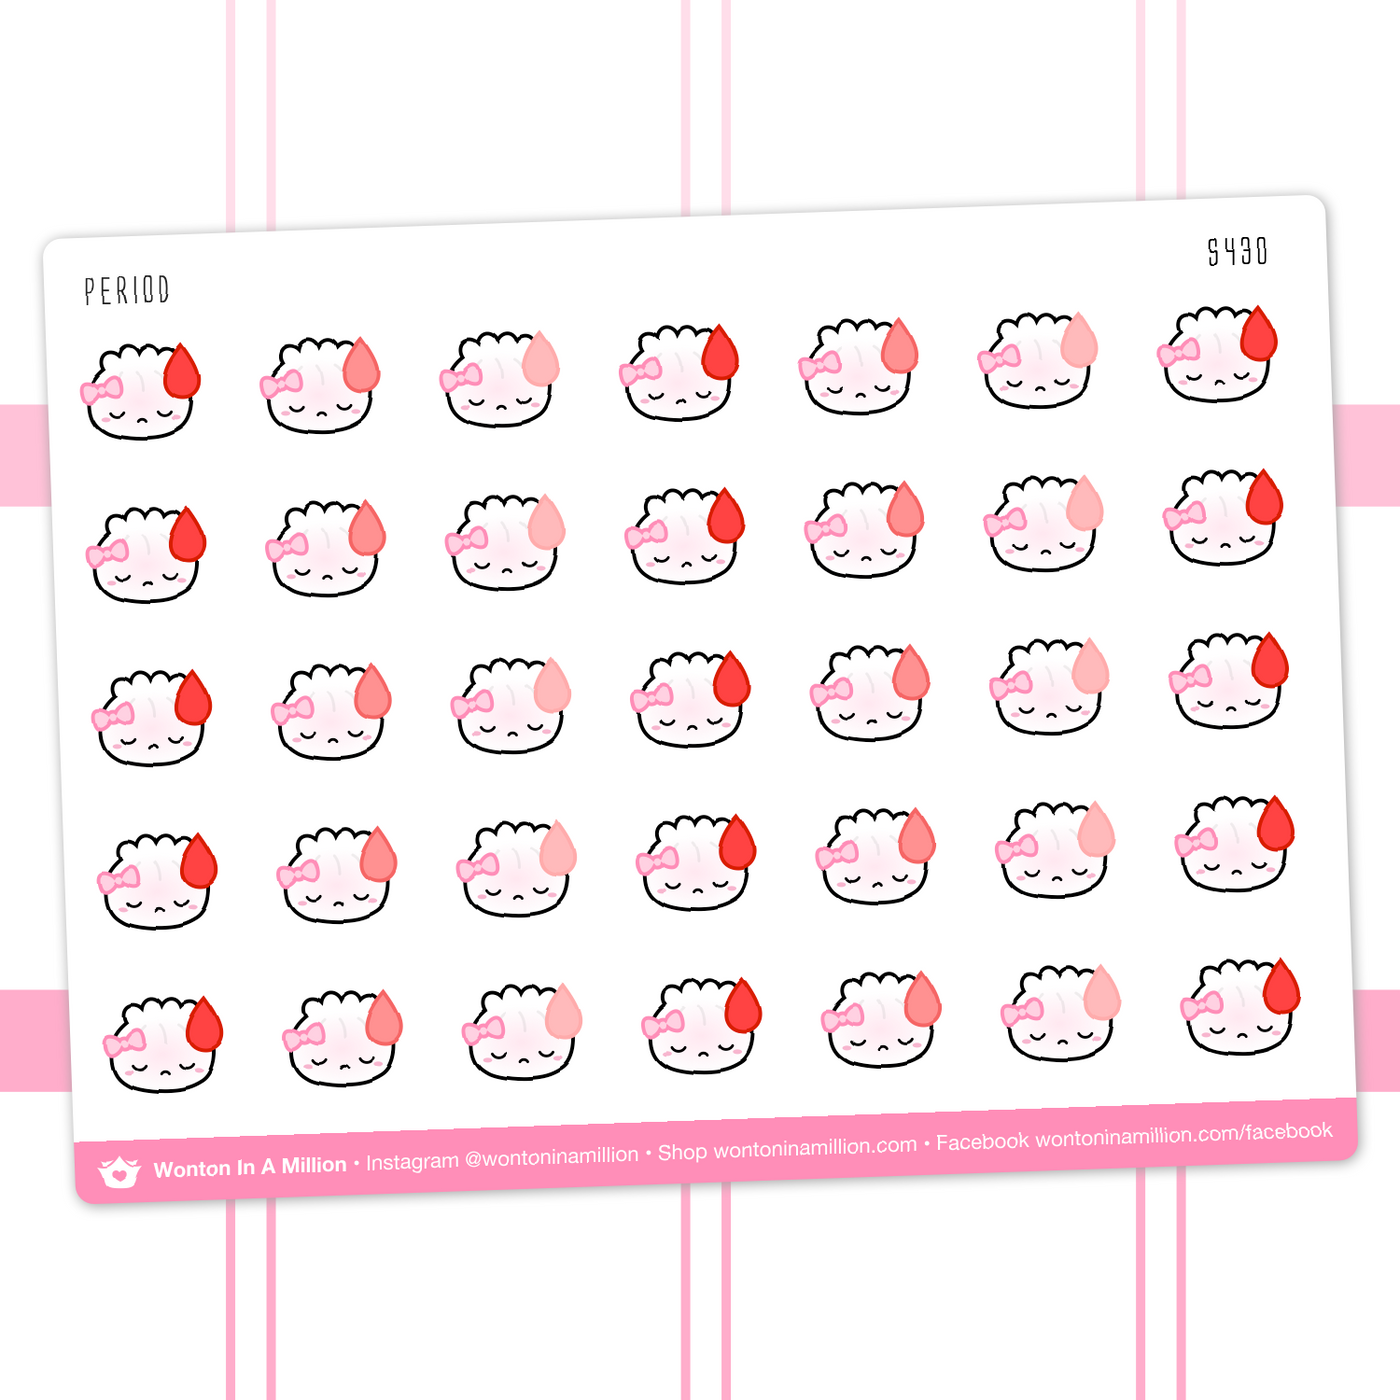 S430 | Period Tracking Stickers